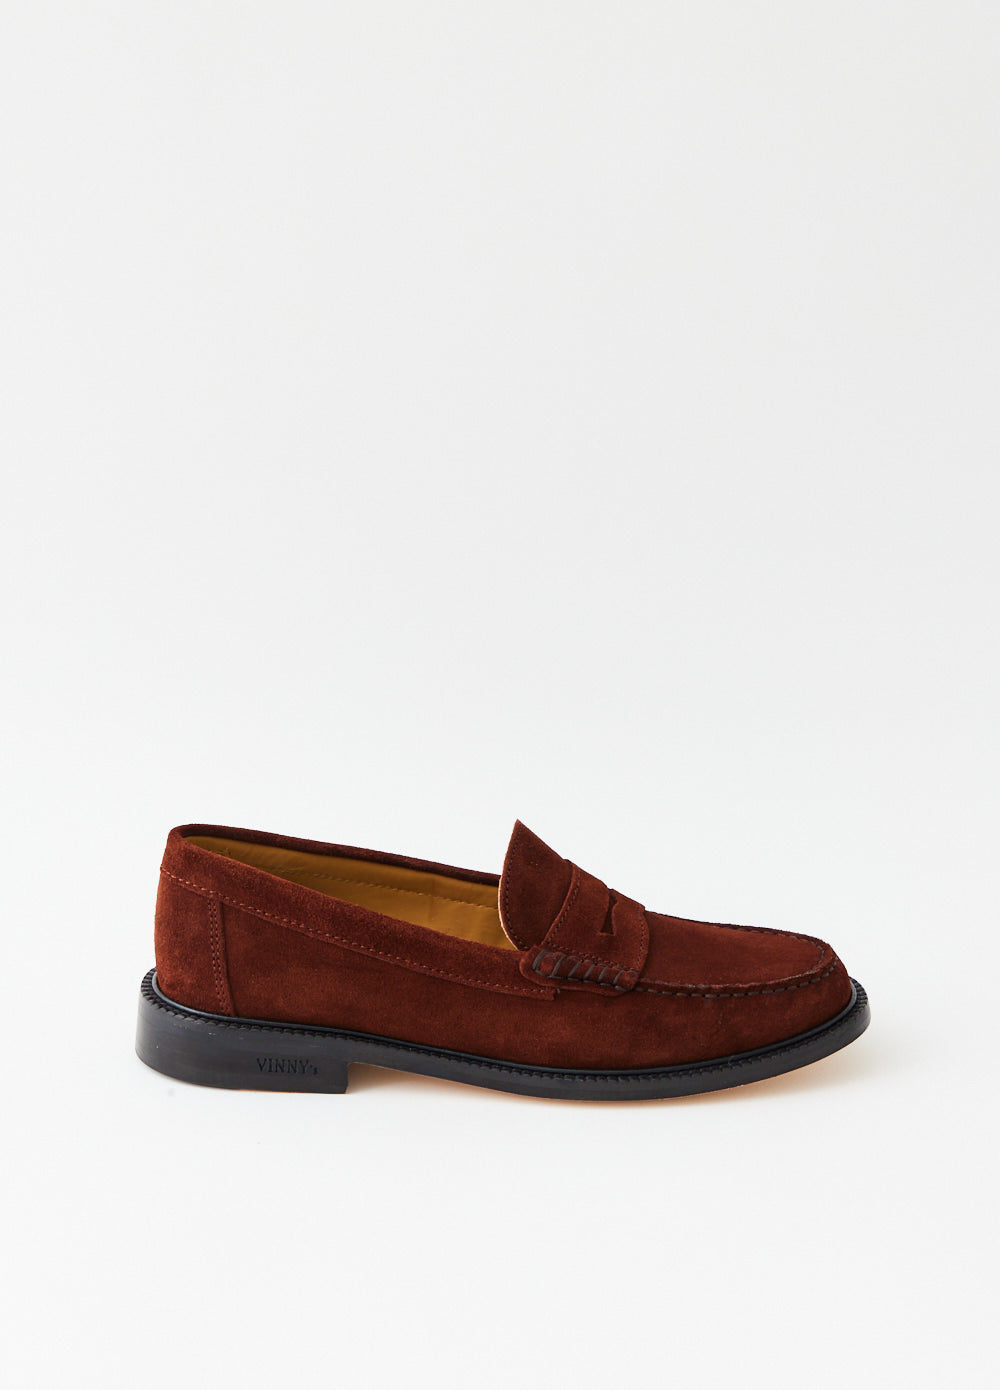 Yardee Moccasin Loafers